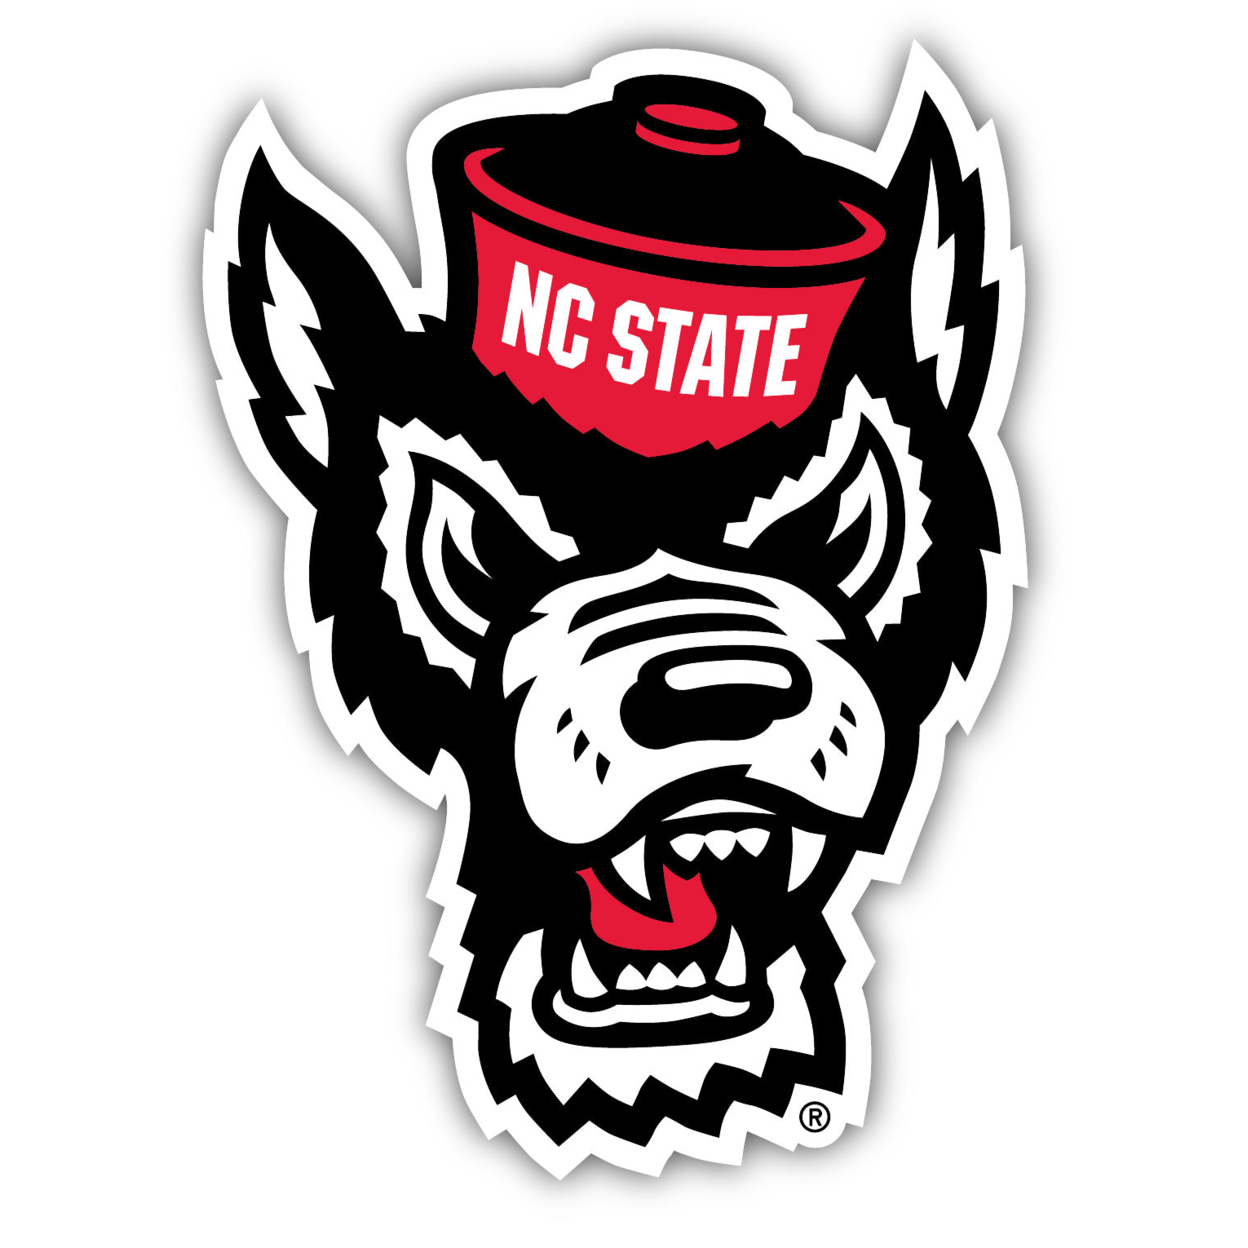 NC State Wolfpack 10 Inch Vinyl Decal Sticker